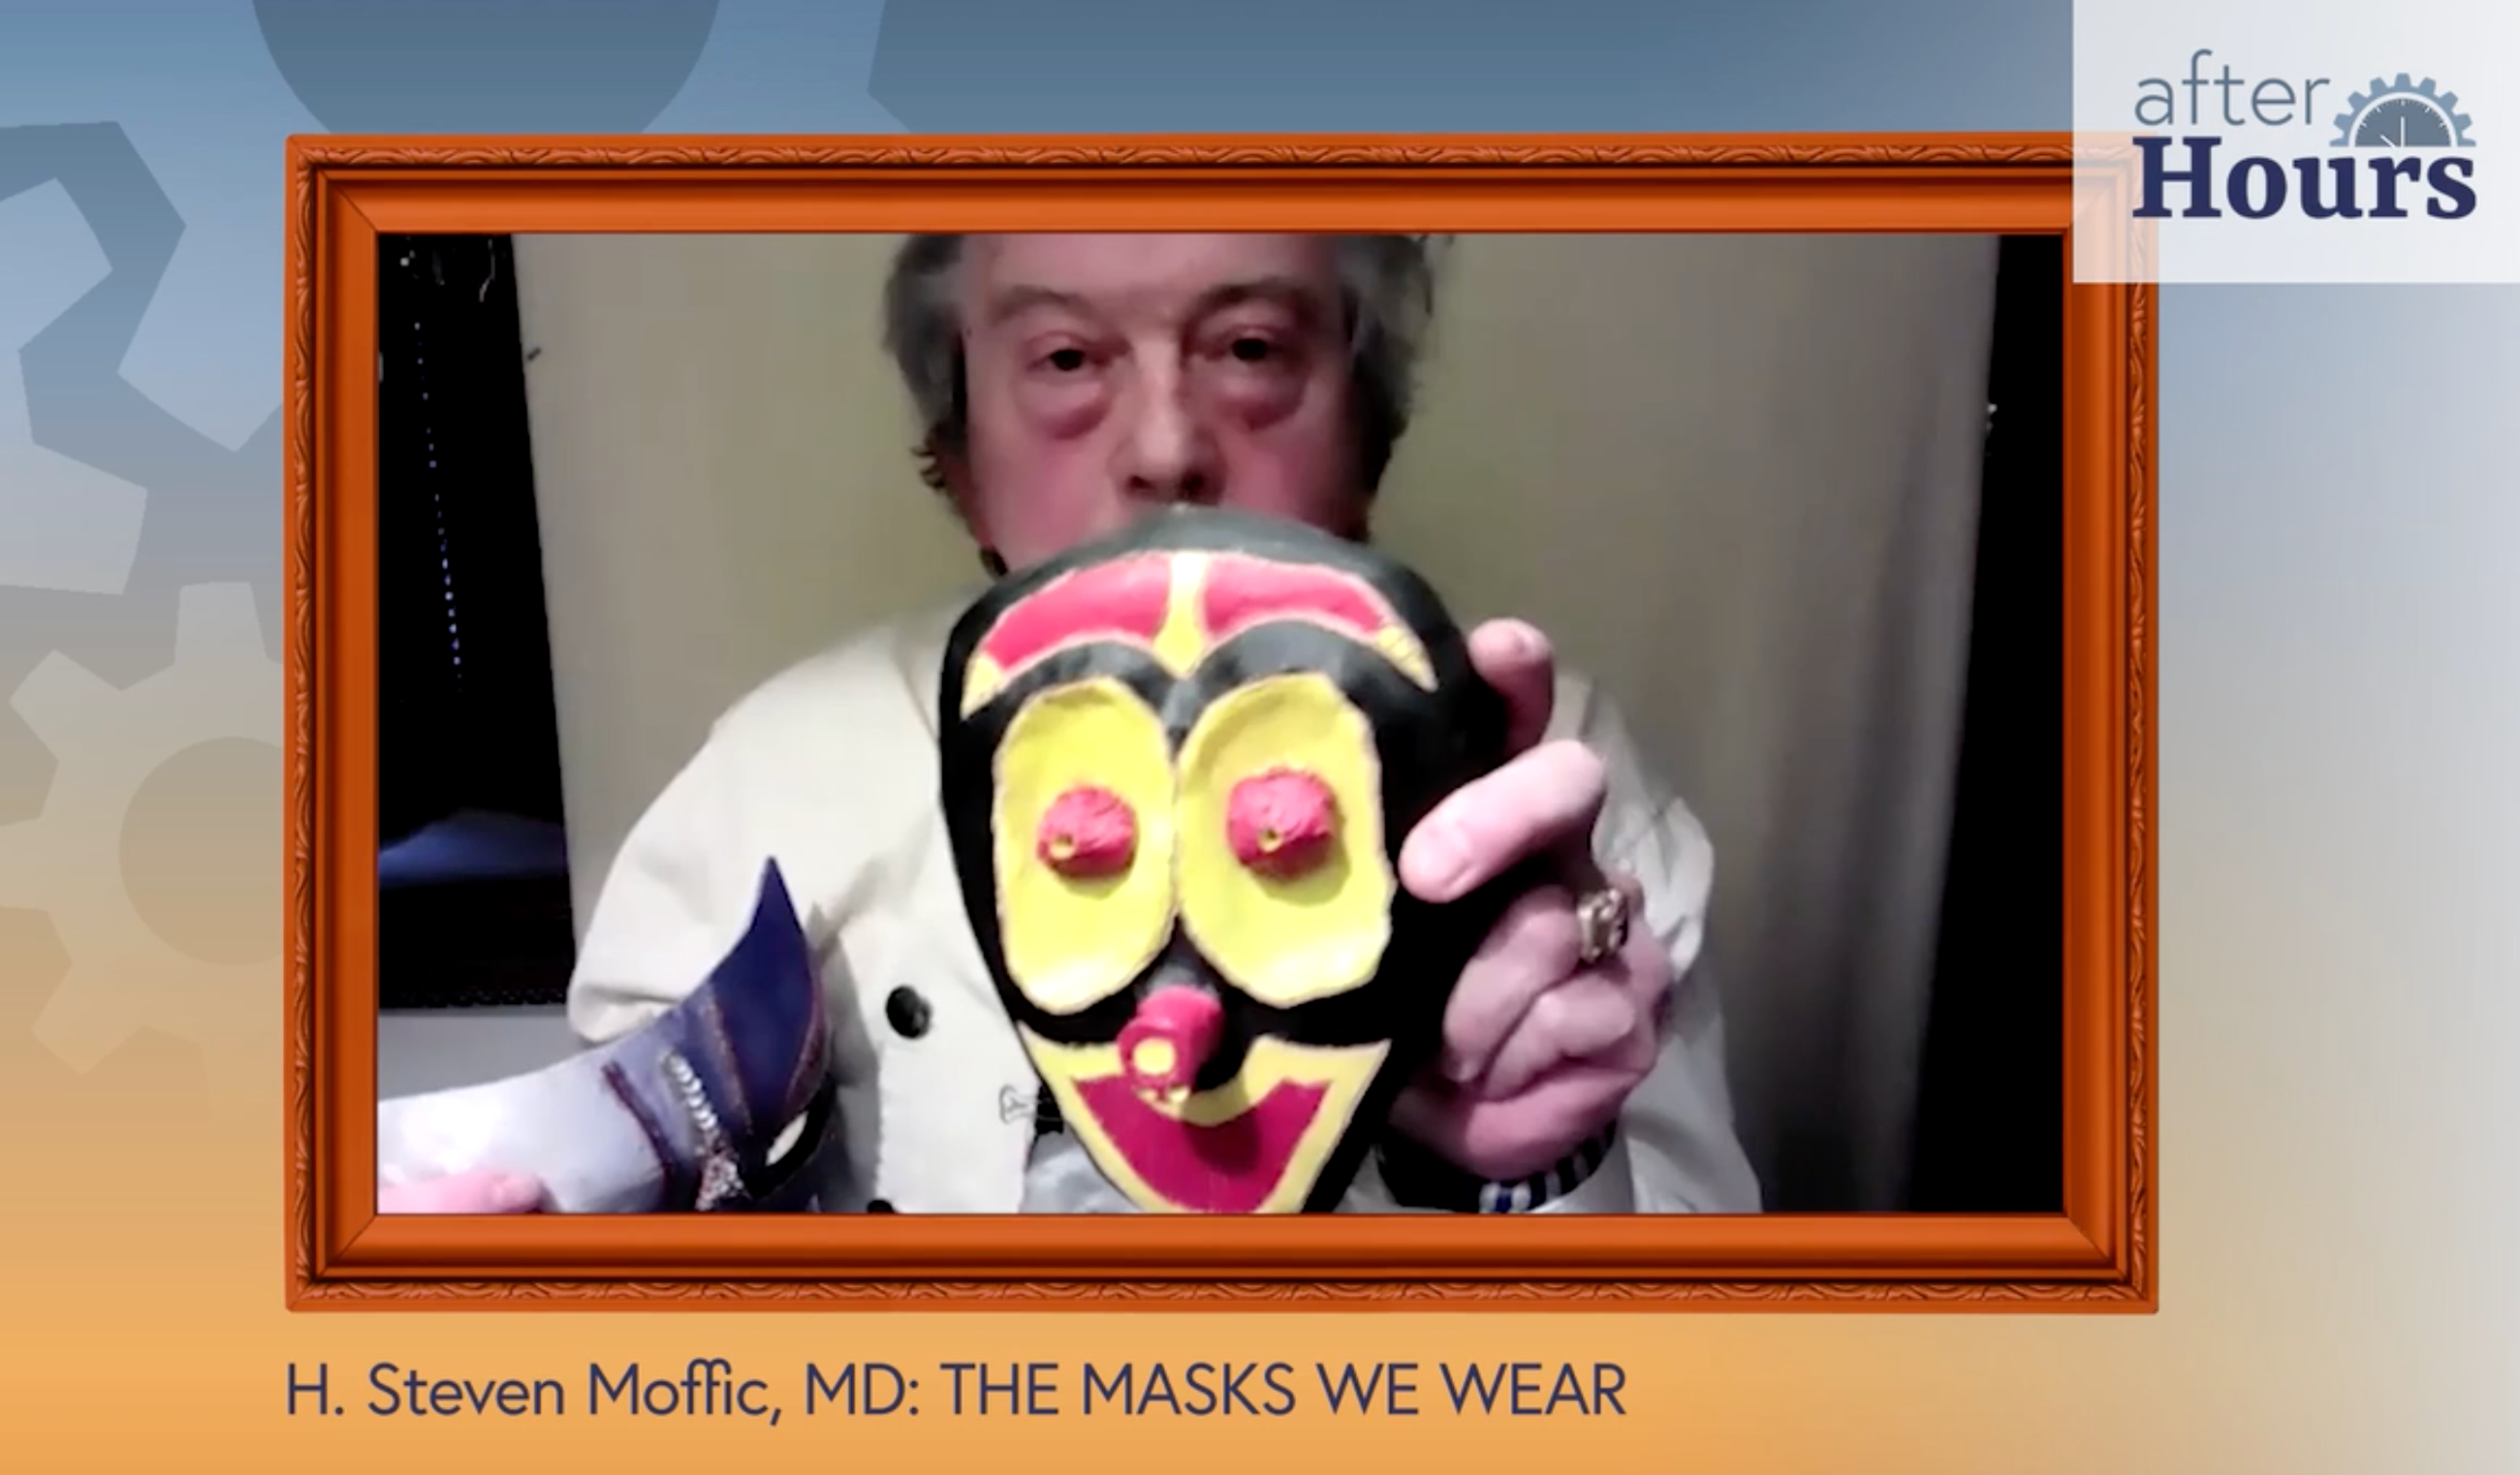 After Hours: The Masked Psychiatrist